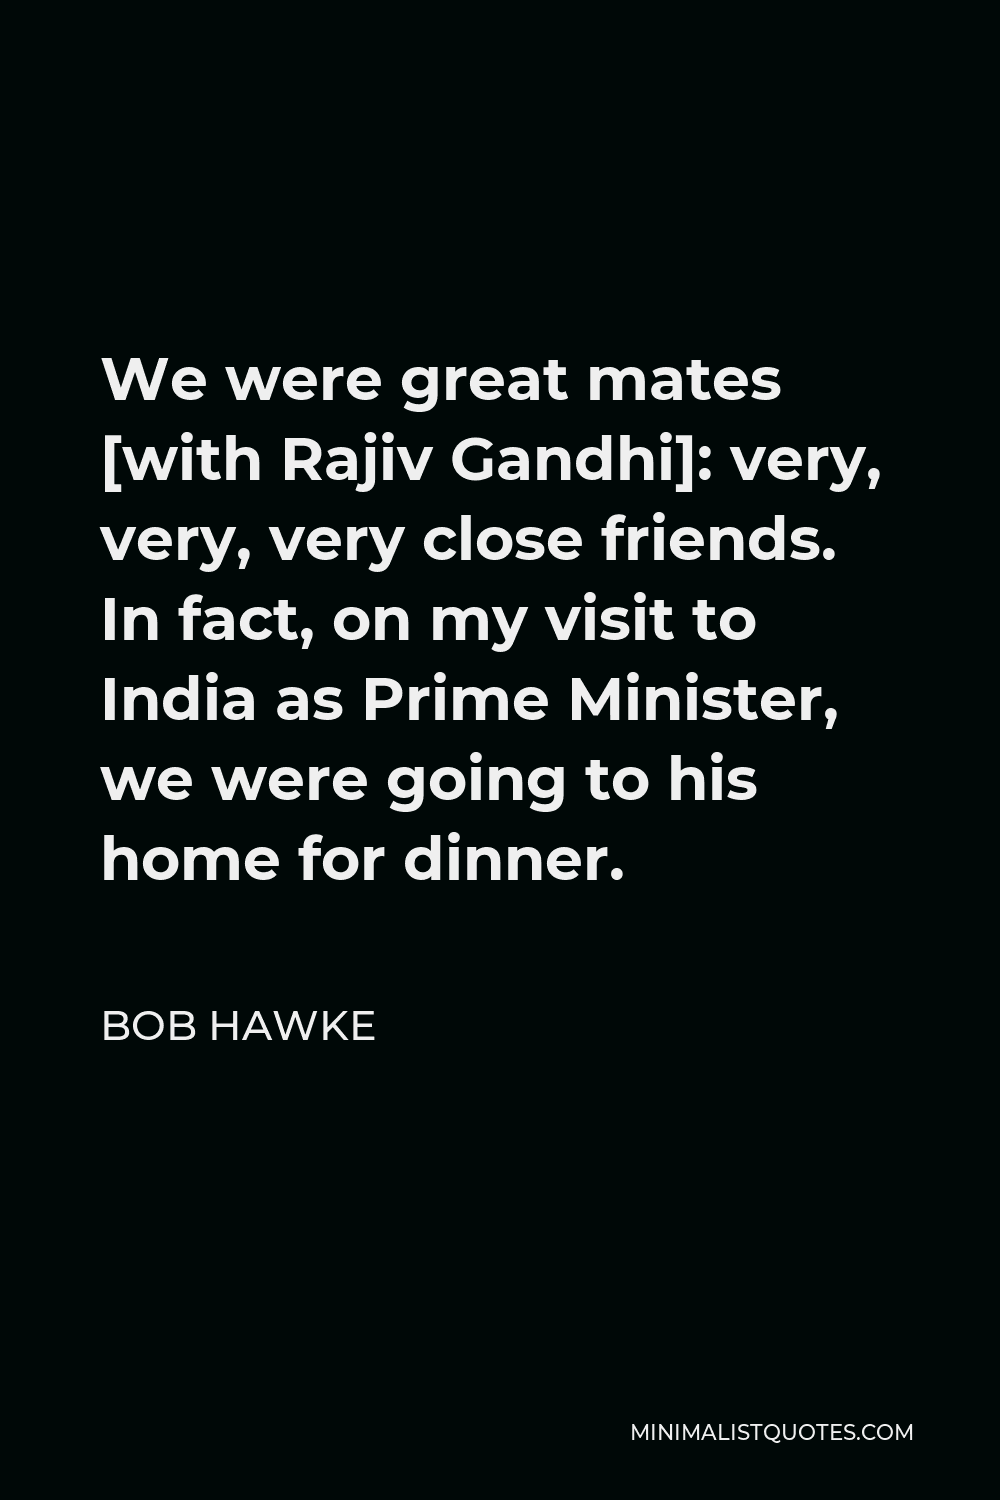 Bob Hawke Quote - We were great mates [with Rajiv Gandhi]: very, very, very close friends. In fact, on my visit to India as Prime Minister, we were going to his home for dinner.